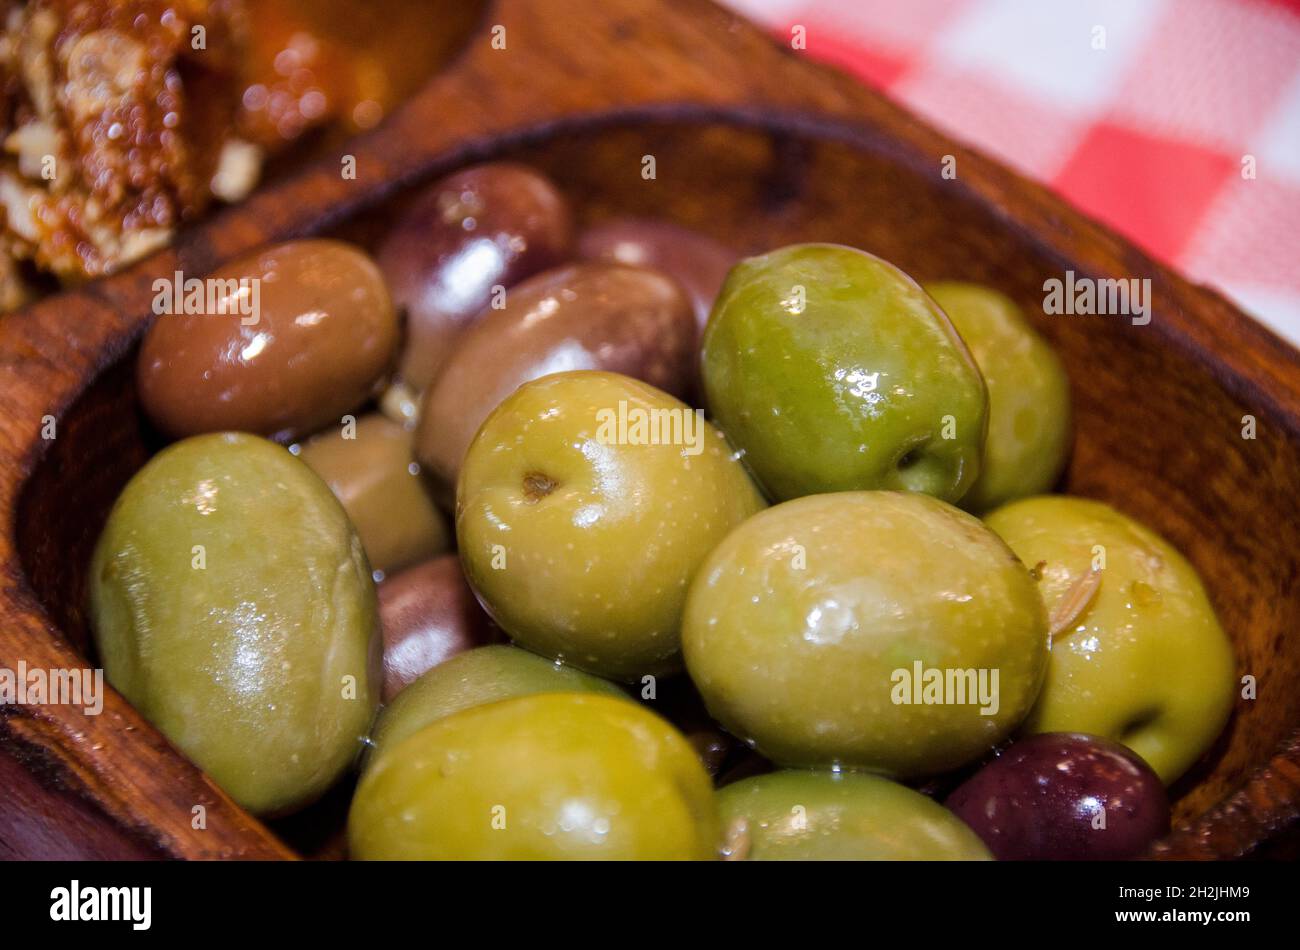 Bowls of Green and black olives served as appetizers Stock Photo